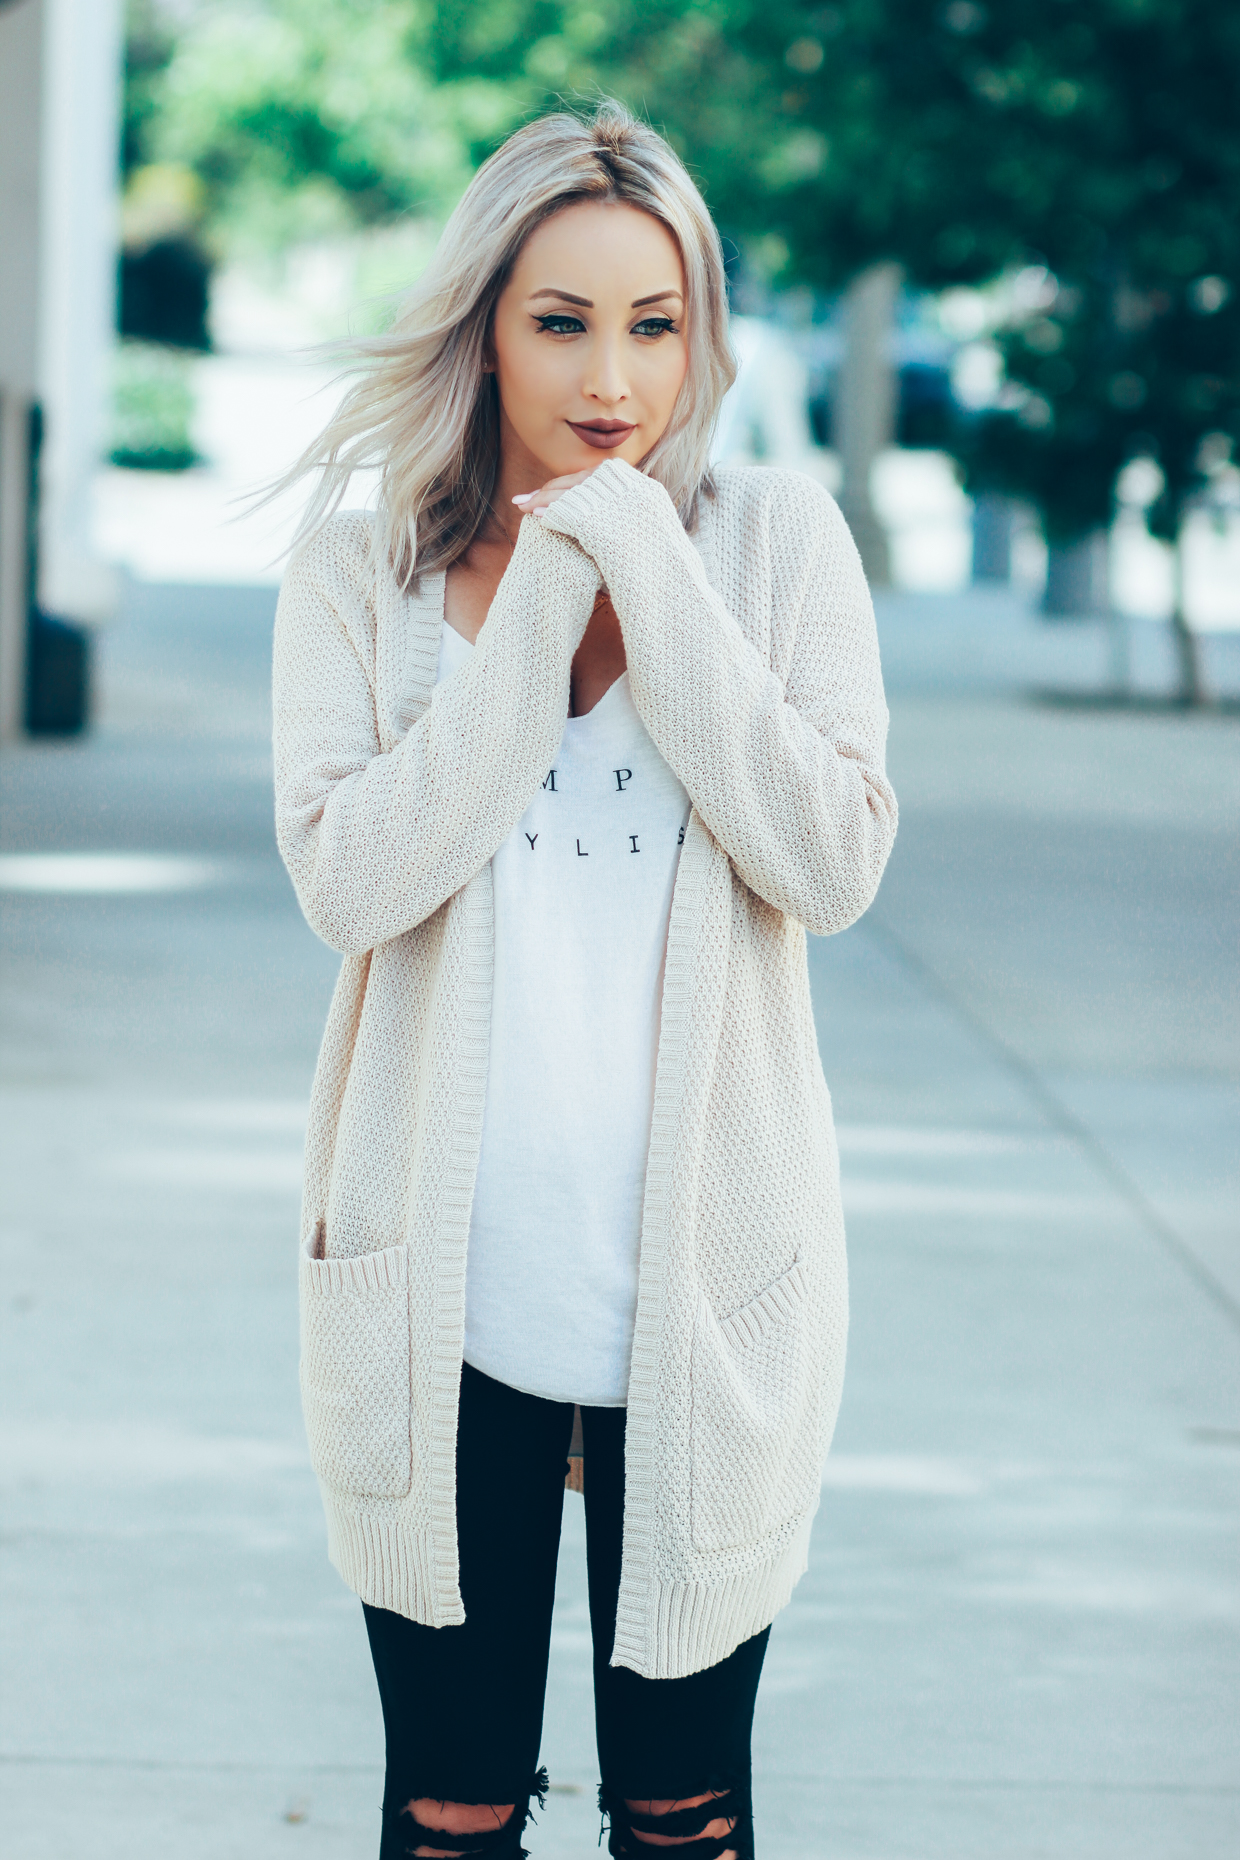 Blondie in the City | Casual #OOTD | Distressed Jeans | "A $60 Cardigan That Is Totally Worth The Splurge" @urbanoutfitters